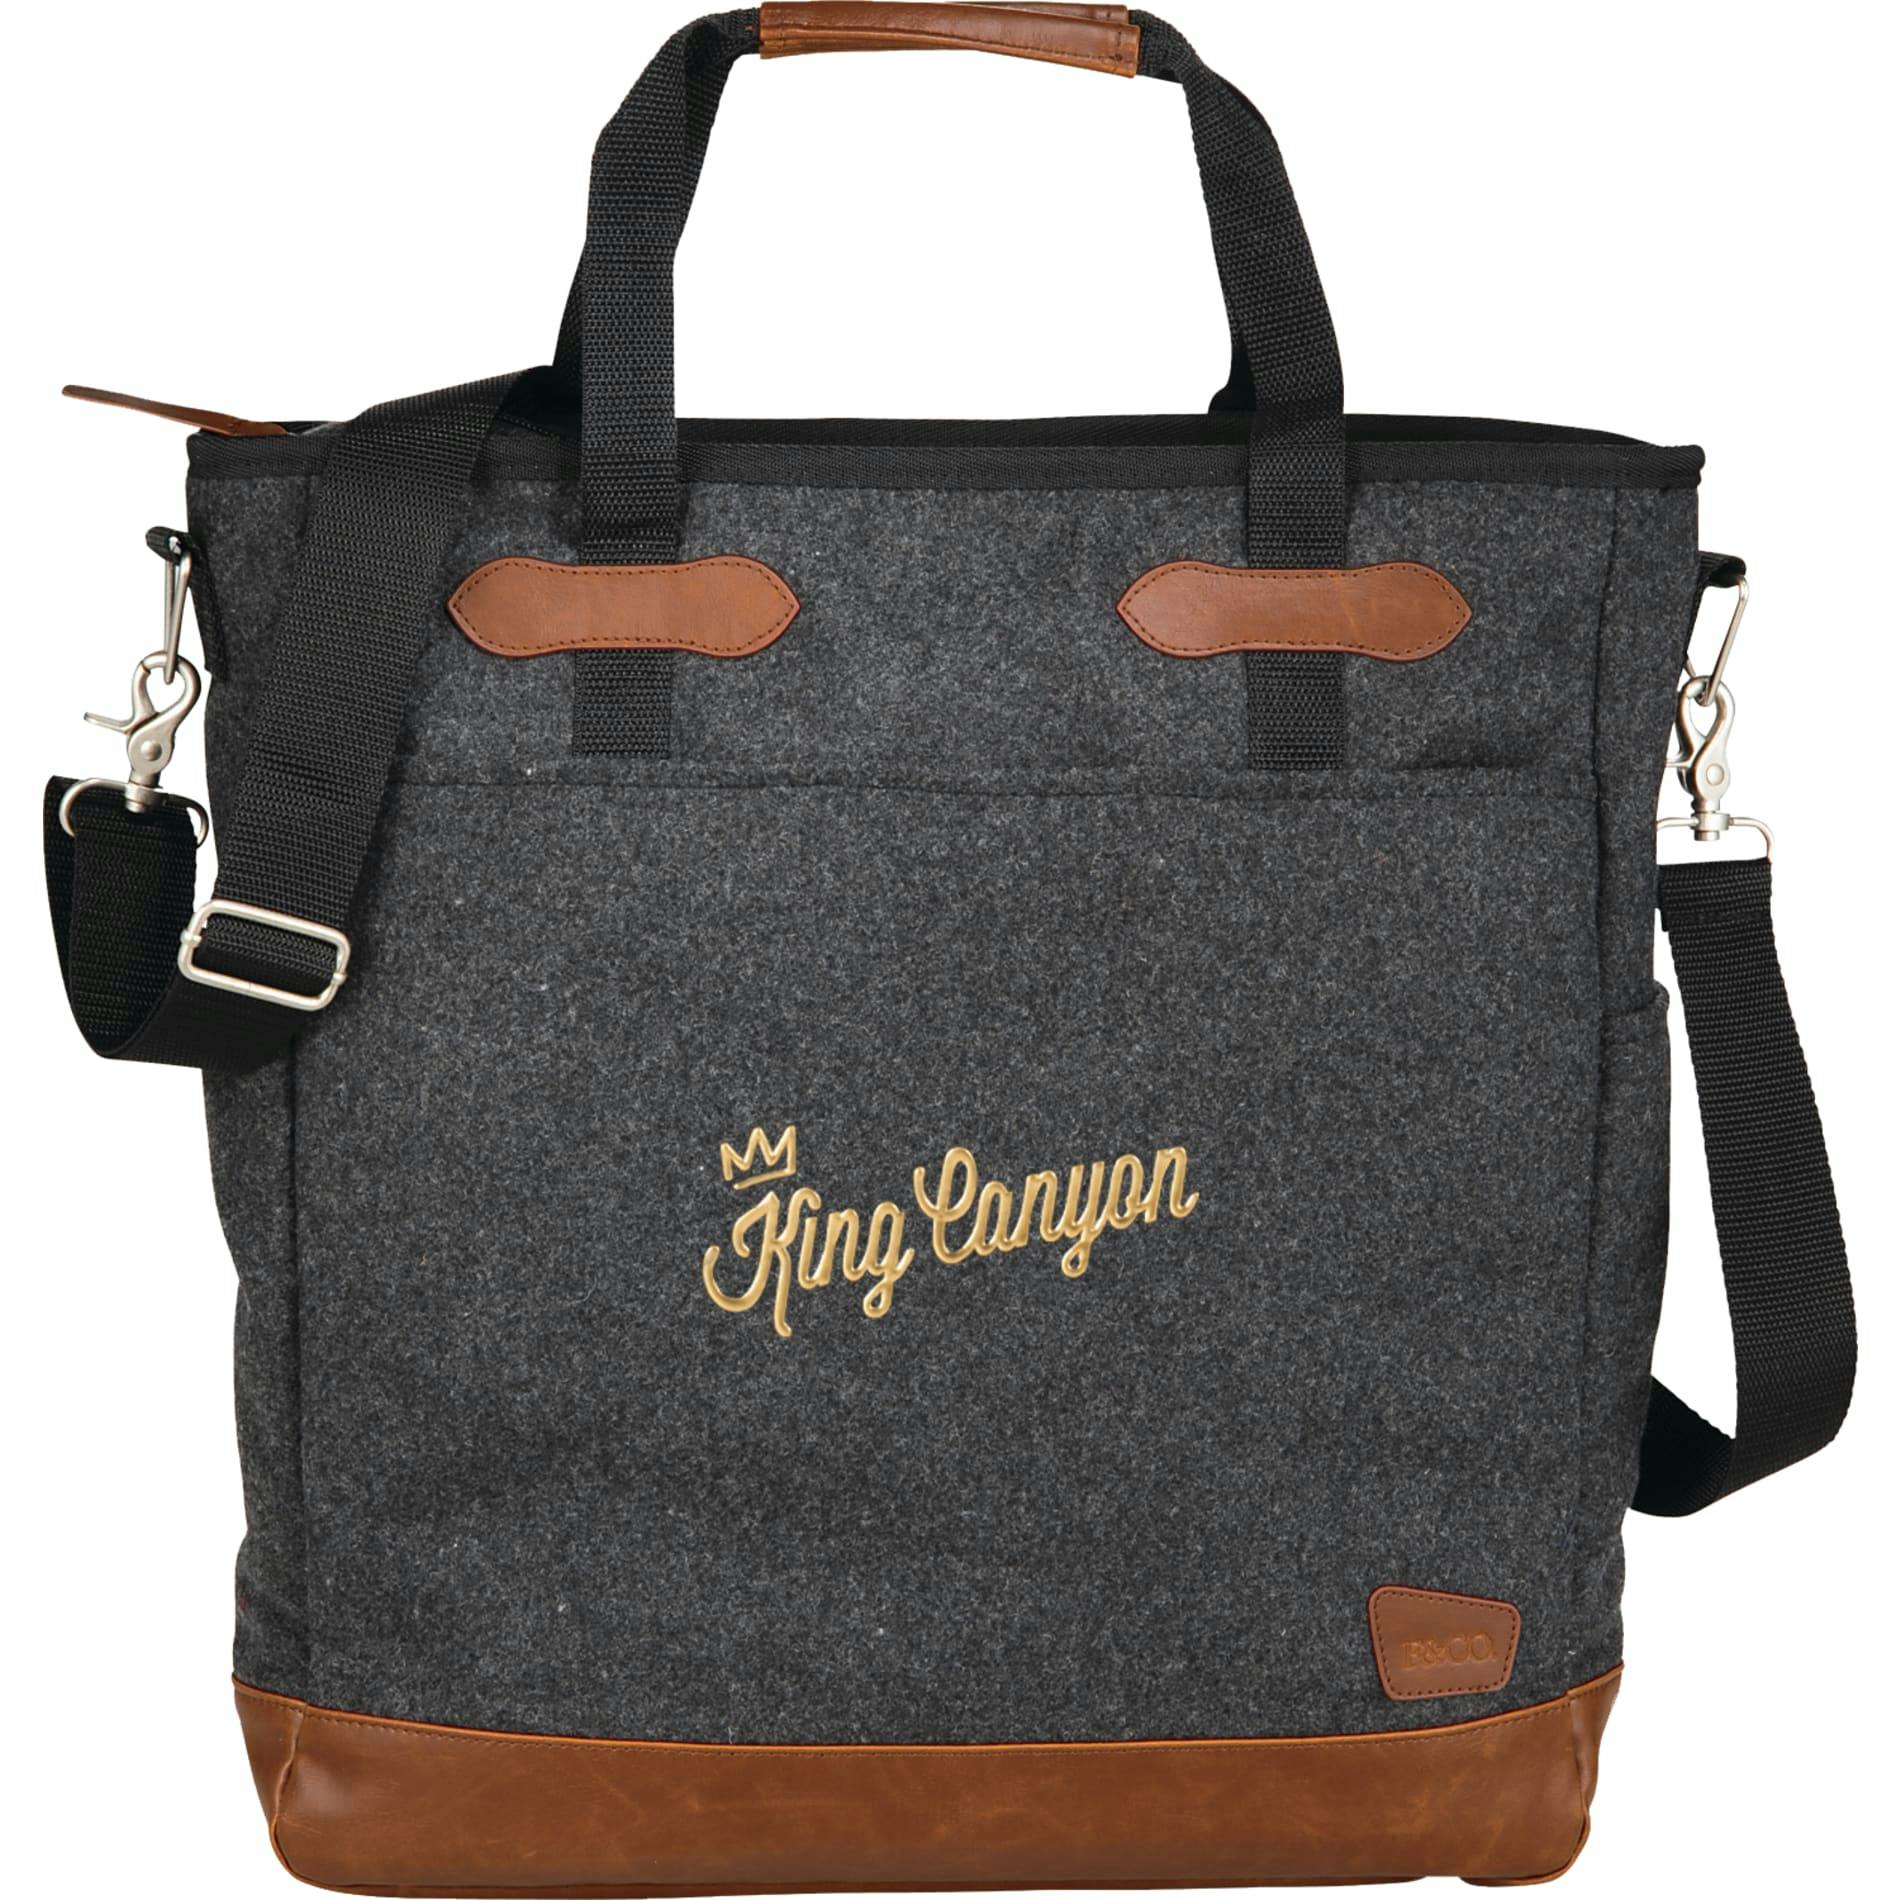 Field & Co.® Campster Wool 15" Computer Tote - additional Image 5